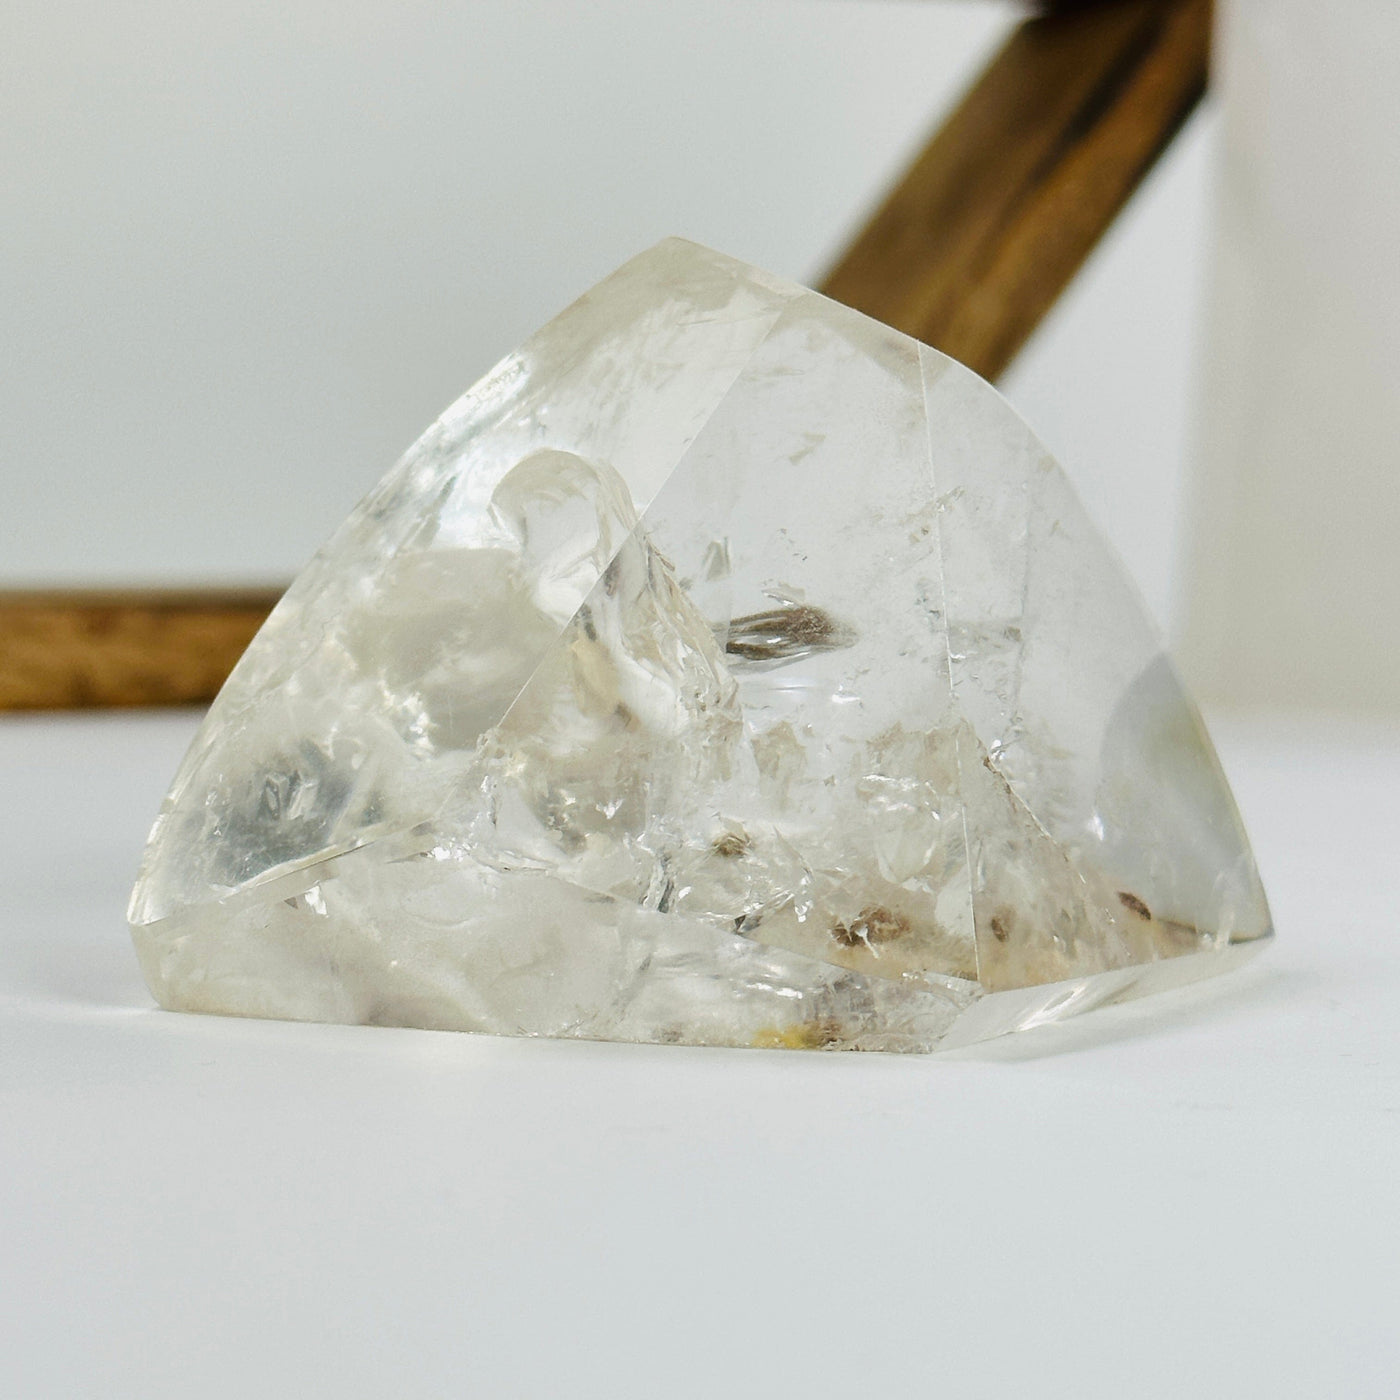 polished crystal quartz with inclusions with decorations in the background